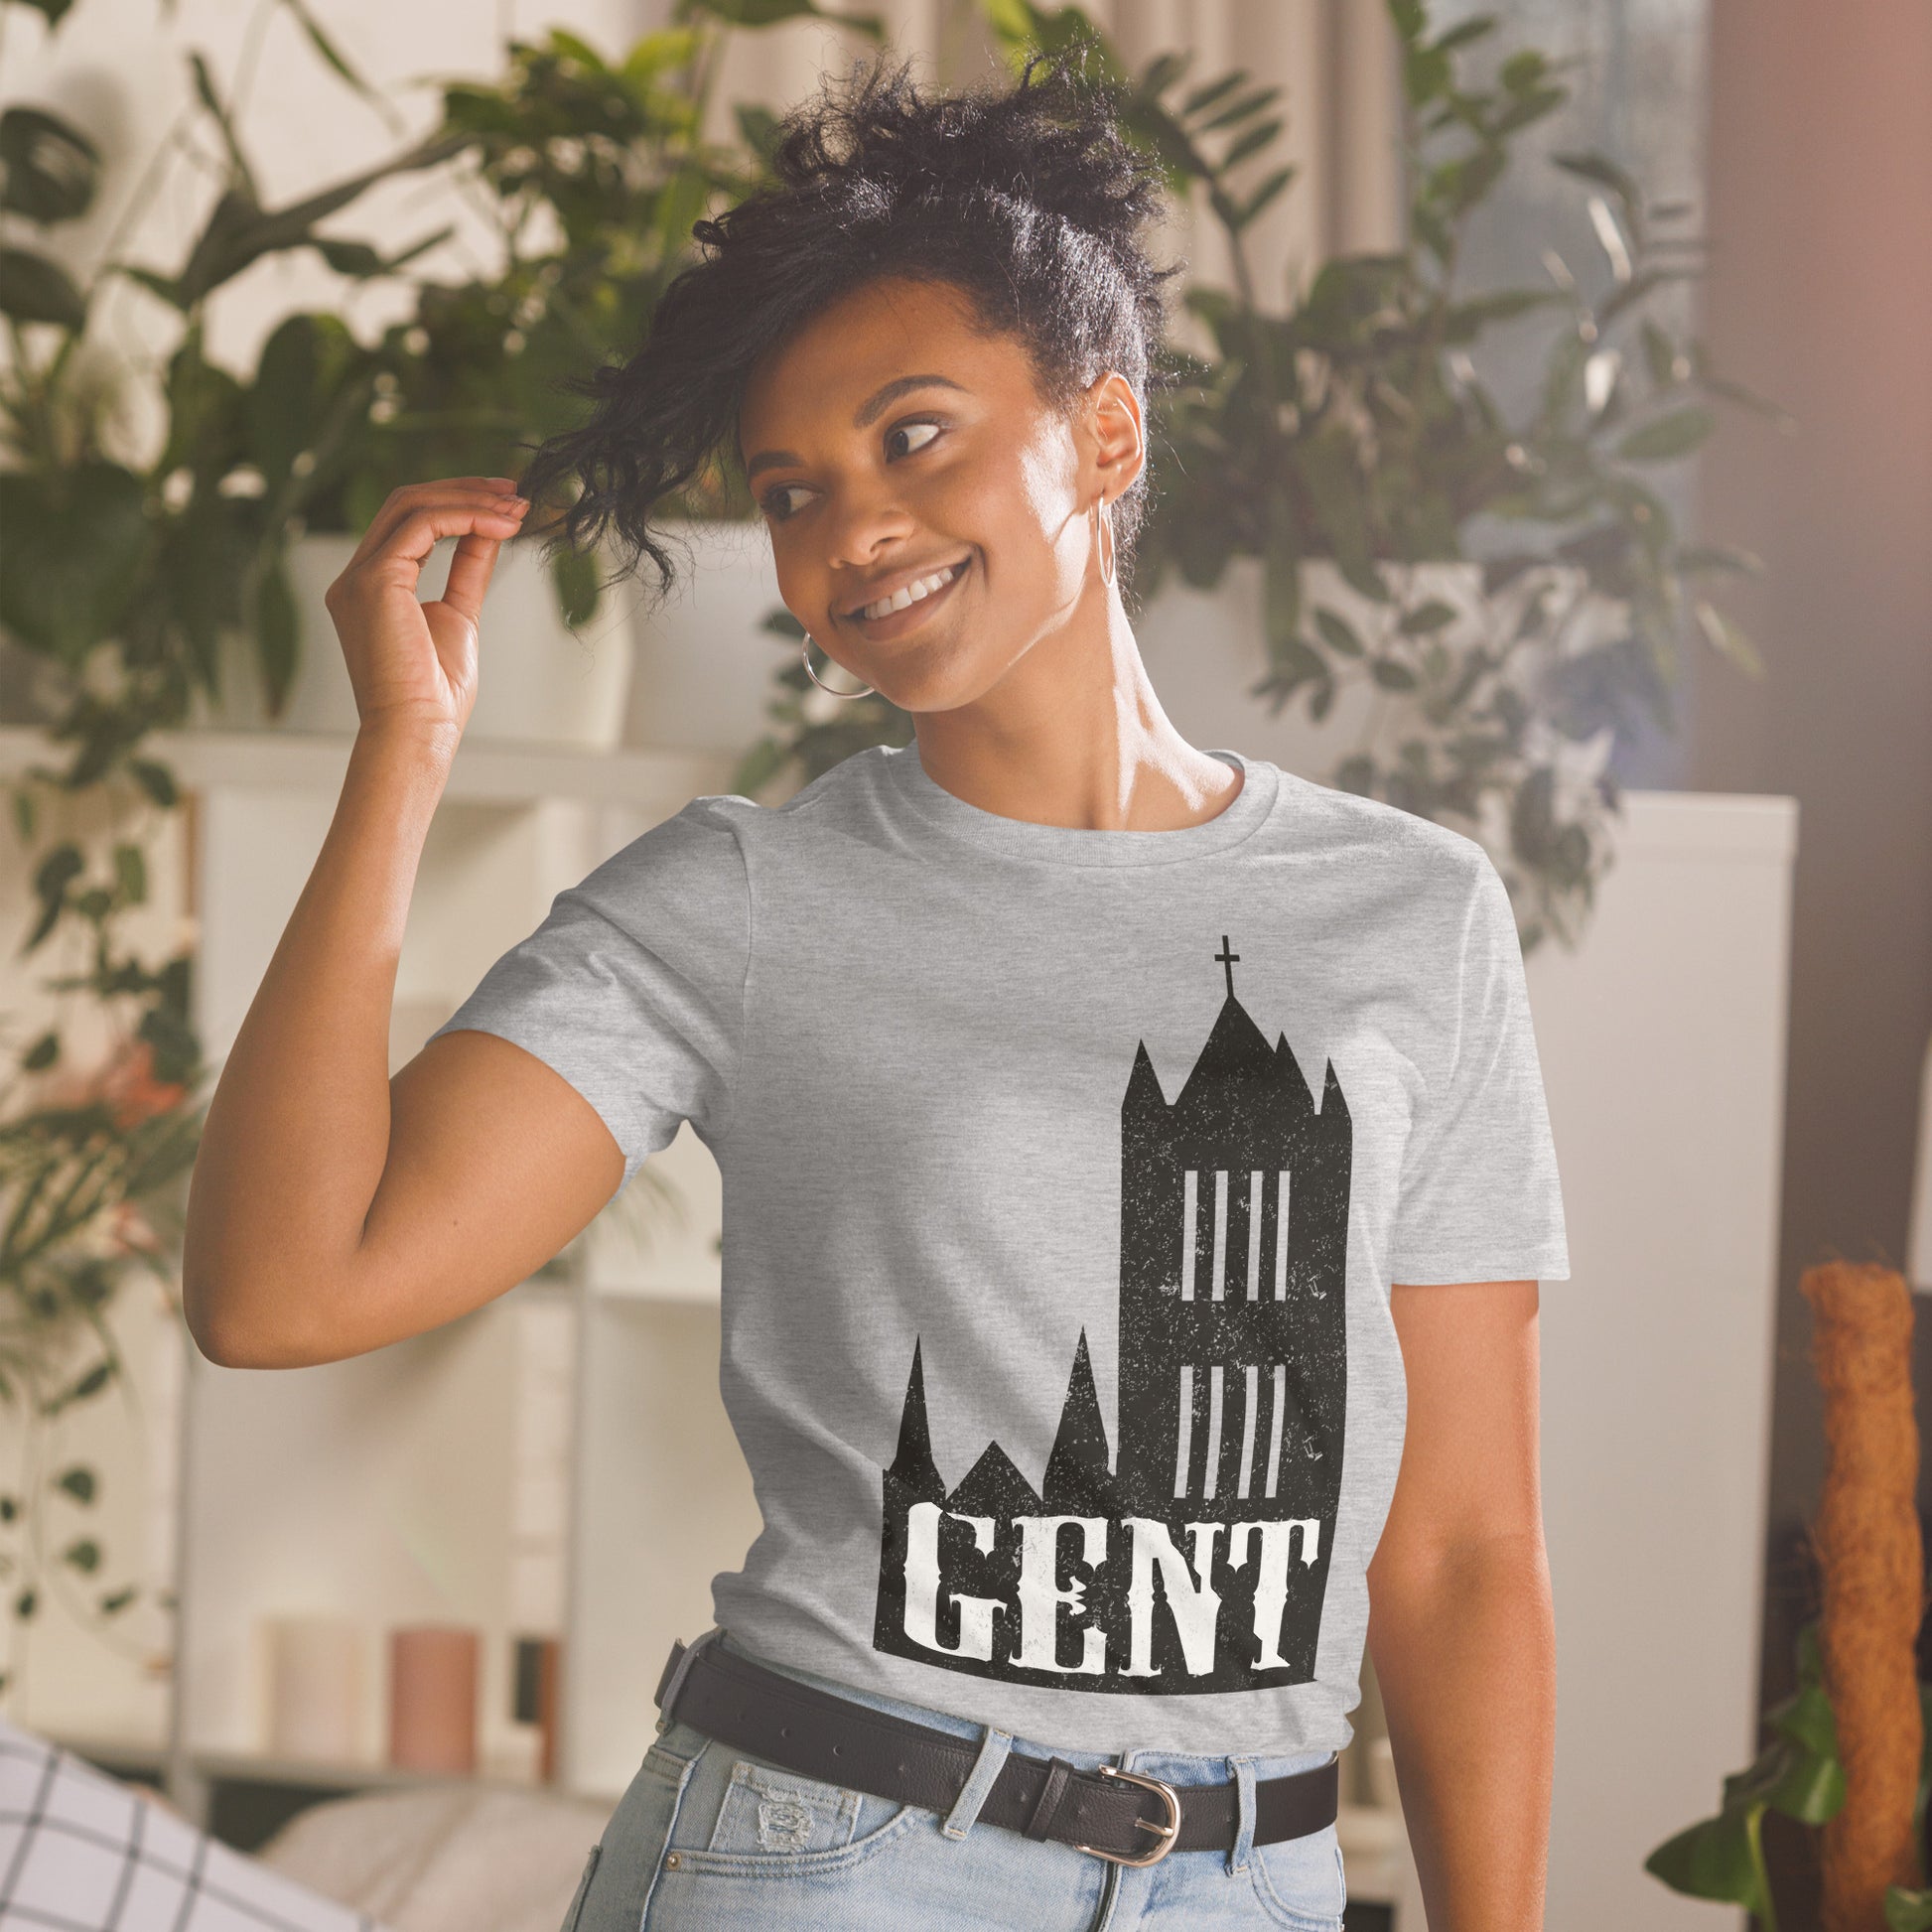 A grey t-shirt with the word "gent" on it, featuring a unique print of Gravensteen Castle Ghent